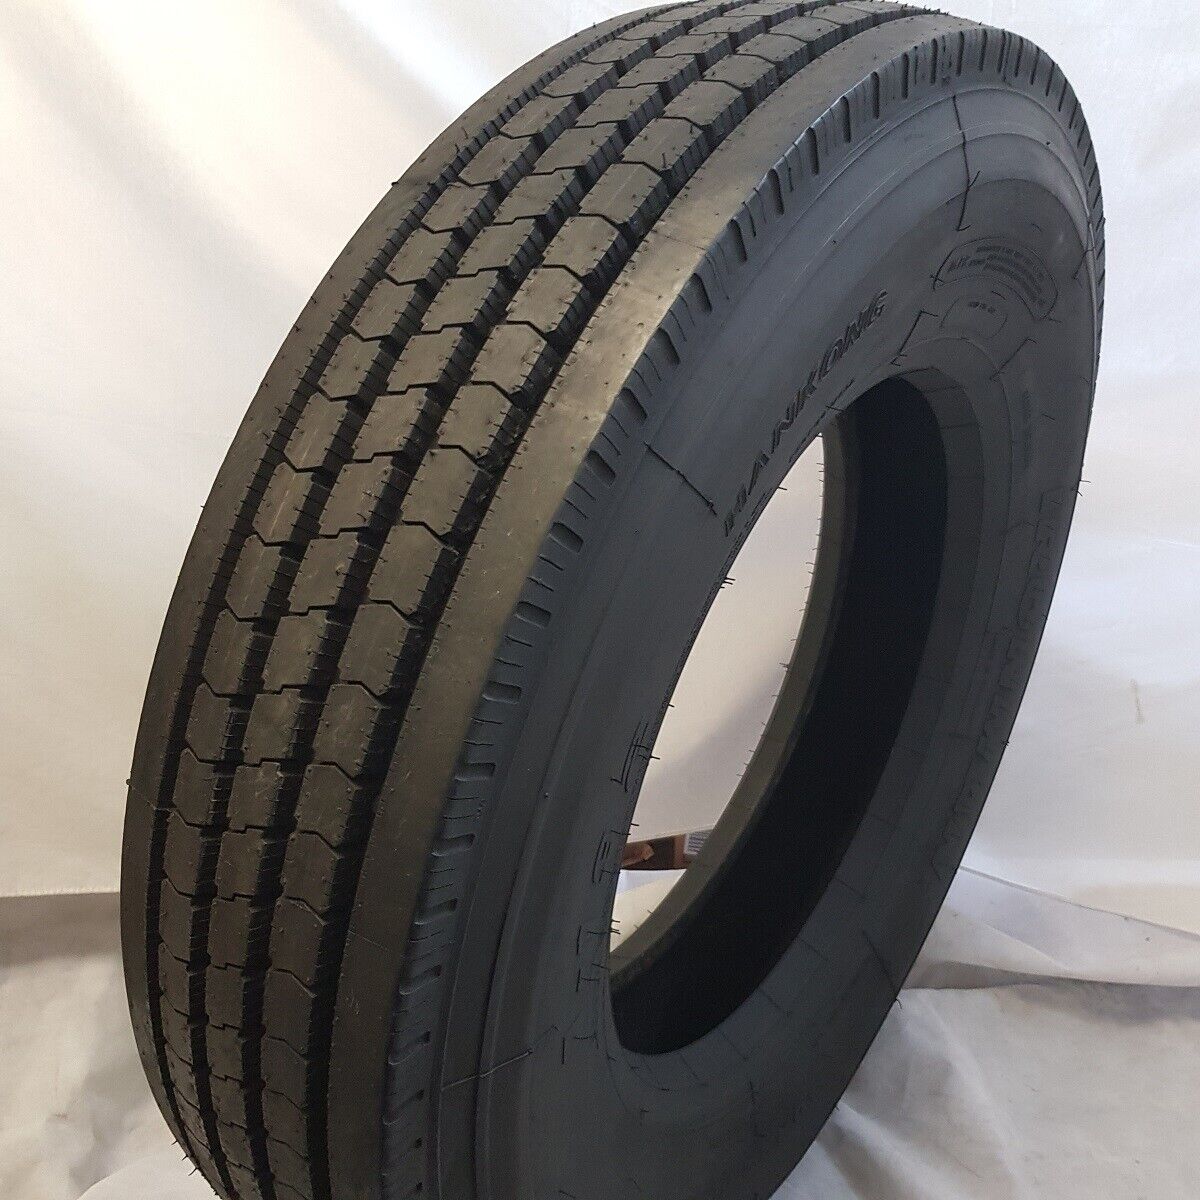 (2-Tires) 10R22.5 ROAD CREW NEW HEAVY DUTY STEER TIRES 16 PLY 144/141M ROAD CREW IRONMAN